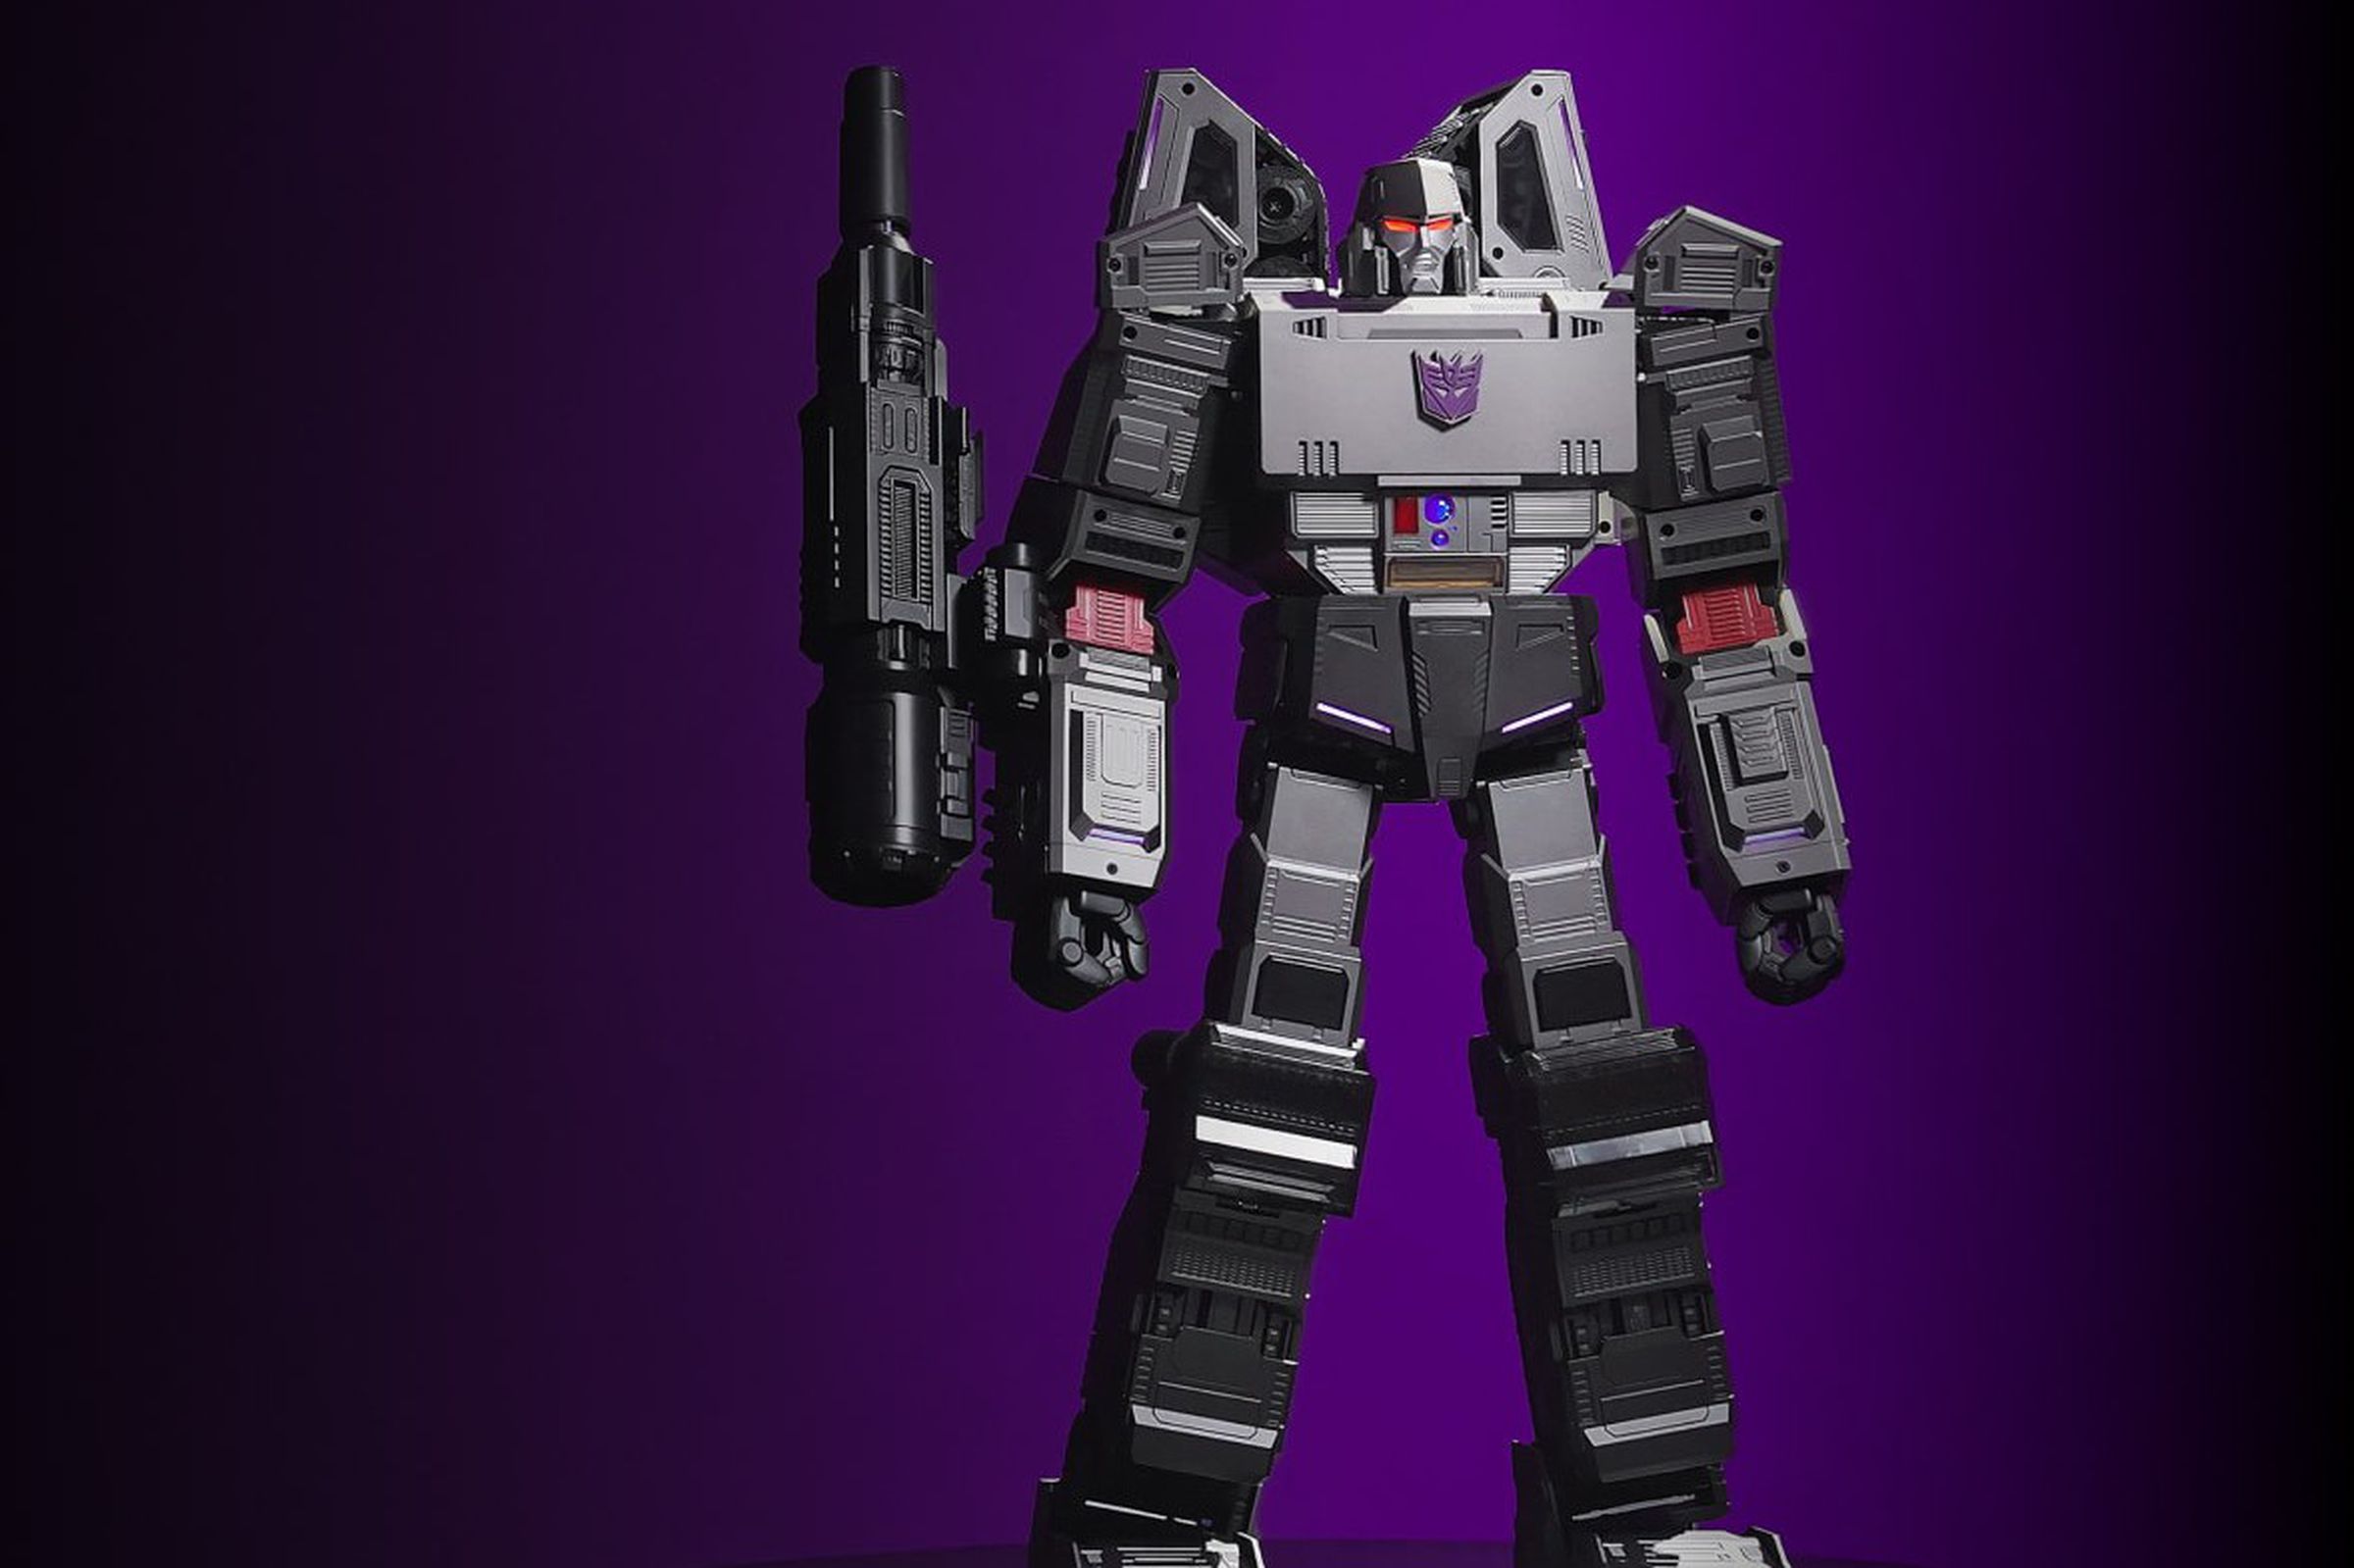 This self-transforming Megatron is as badass as it is expensive